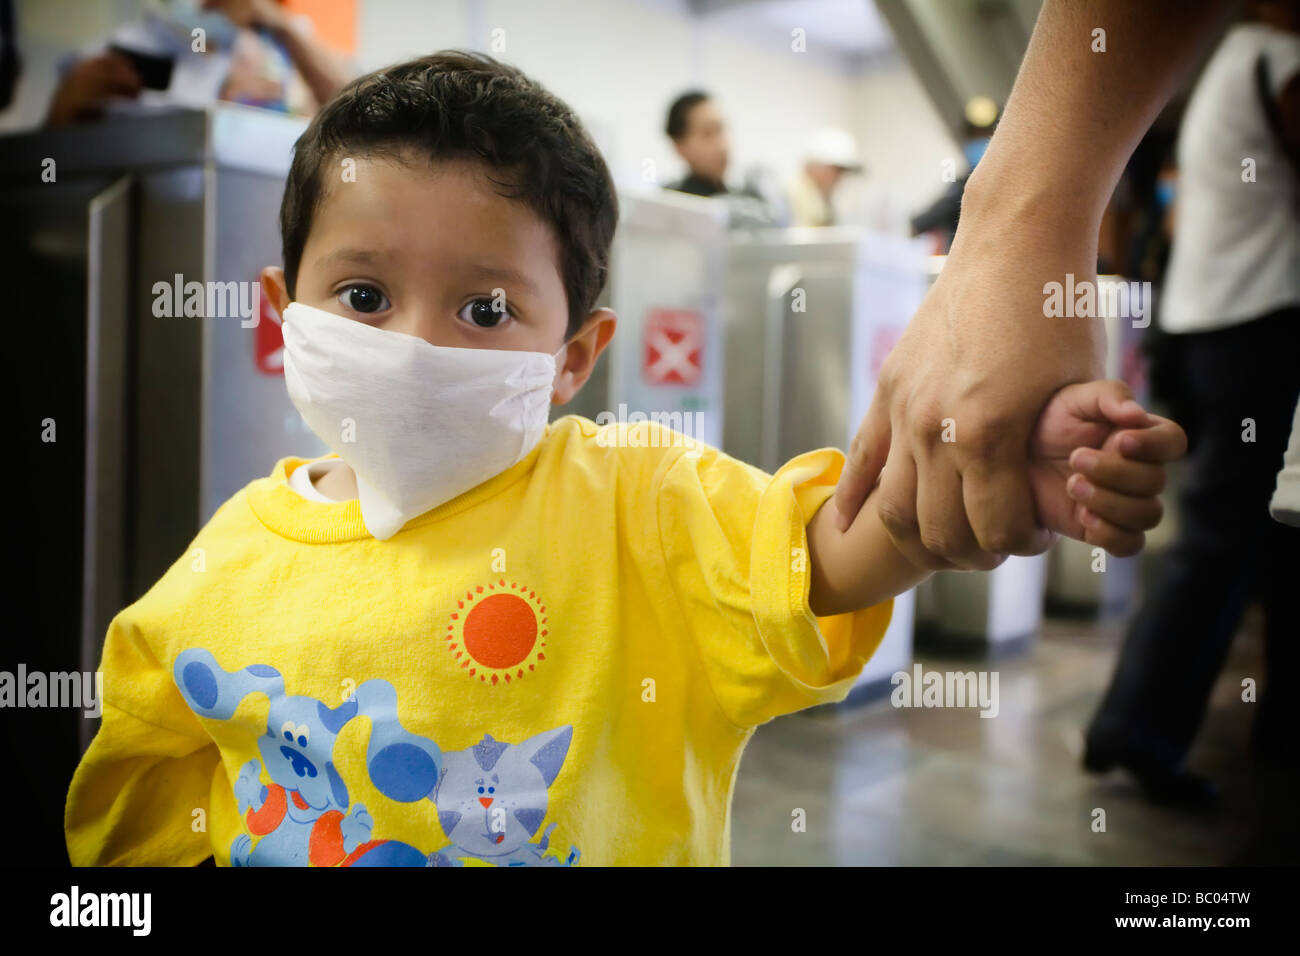 A small kid wearing a mask is held by his mother's hand at a metro station in Mexico City, DF, Mexico. Stock Photo